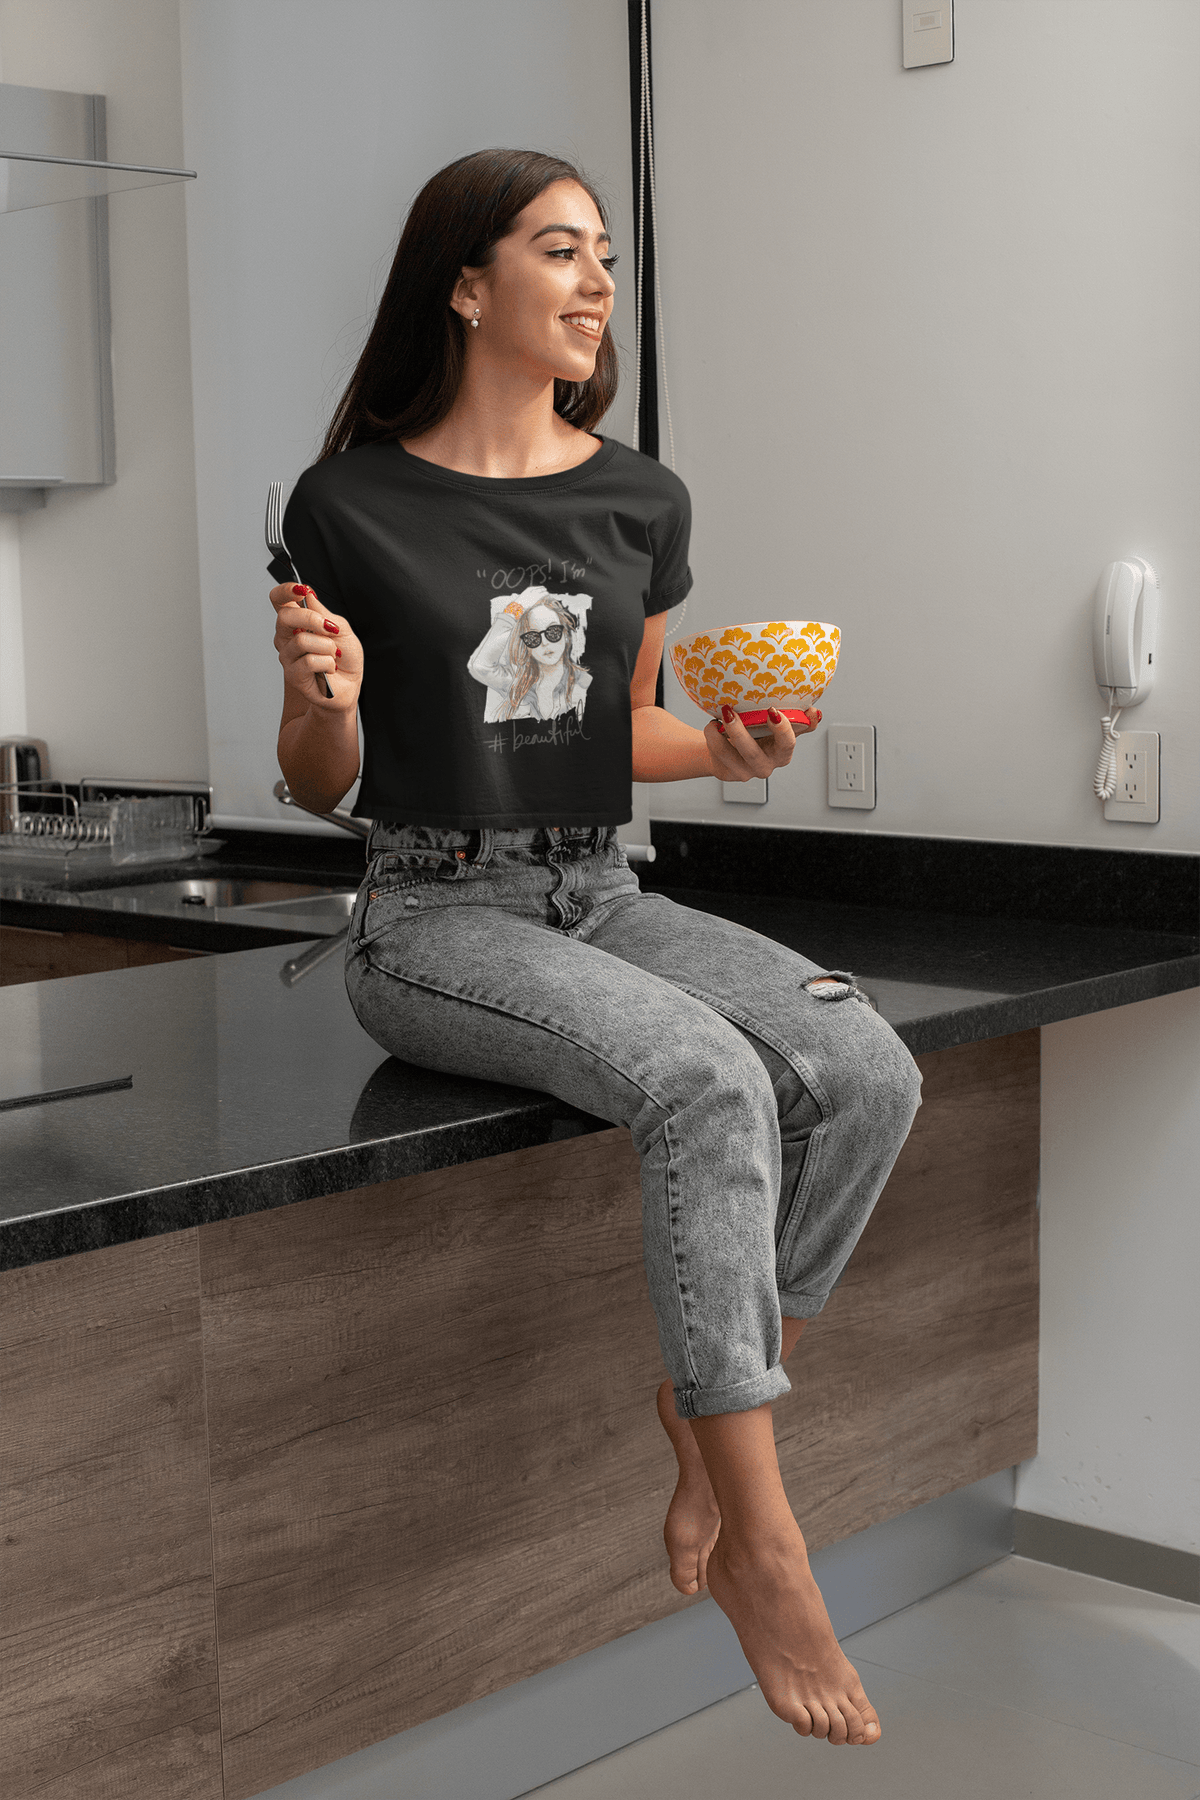 OOPs I am Beautiful Cropped Tee-Cropped Tees-StylinArts